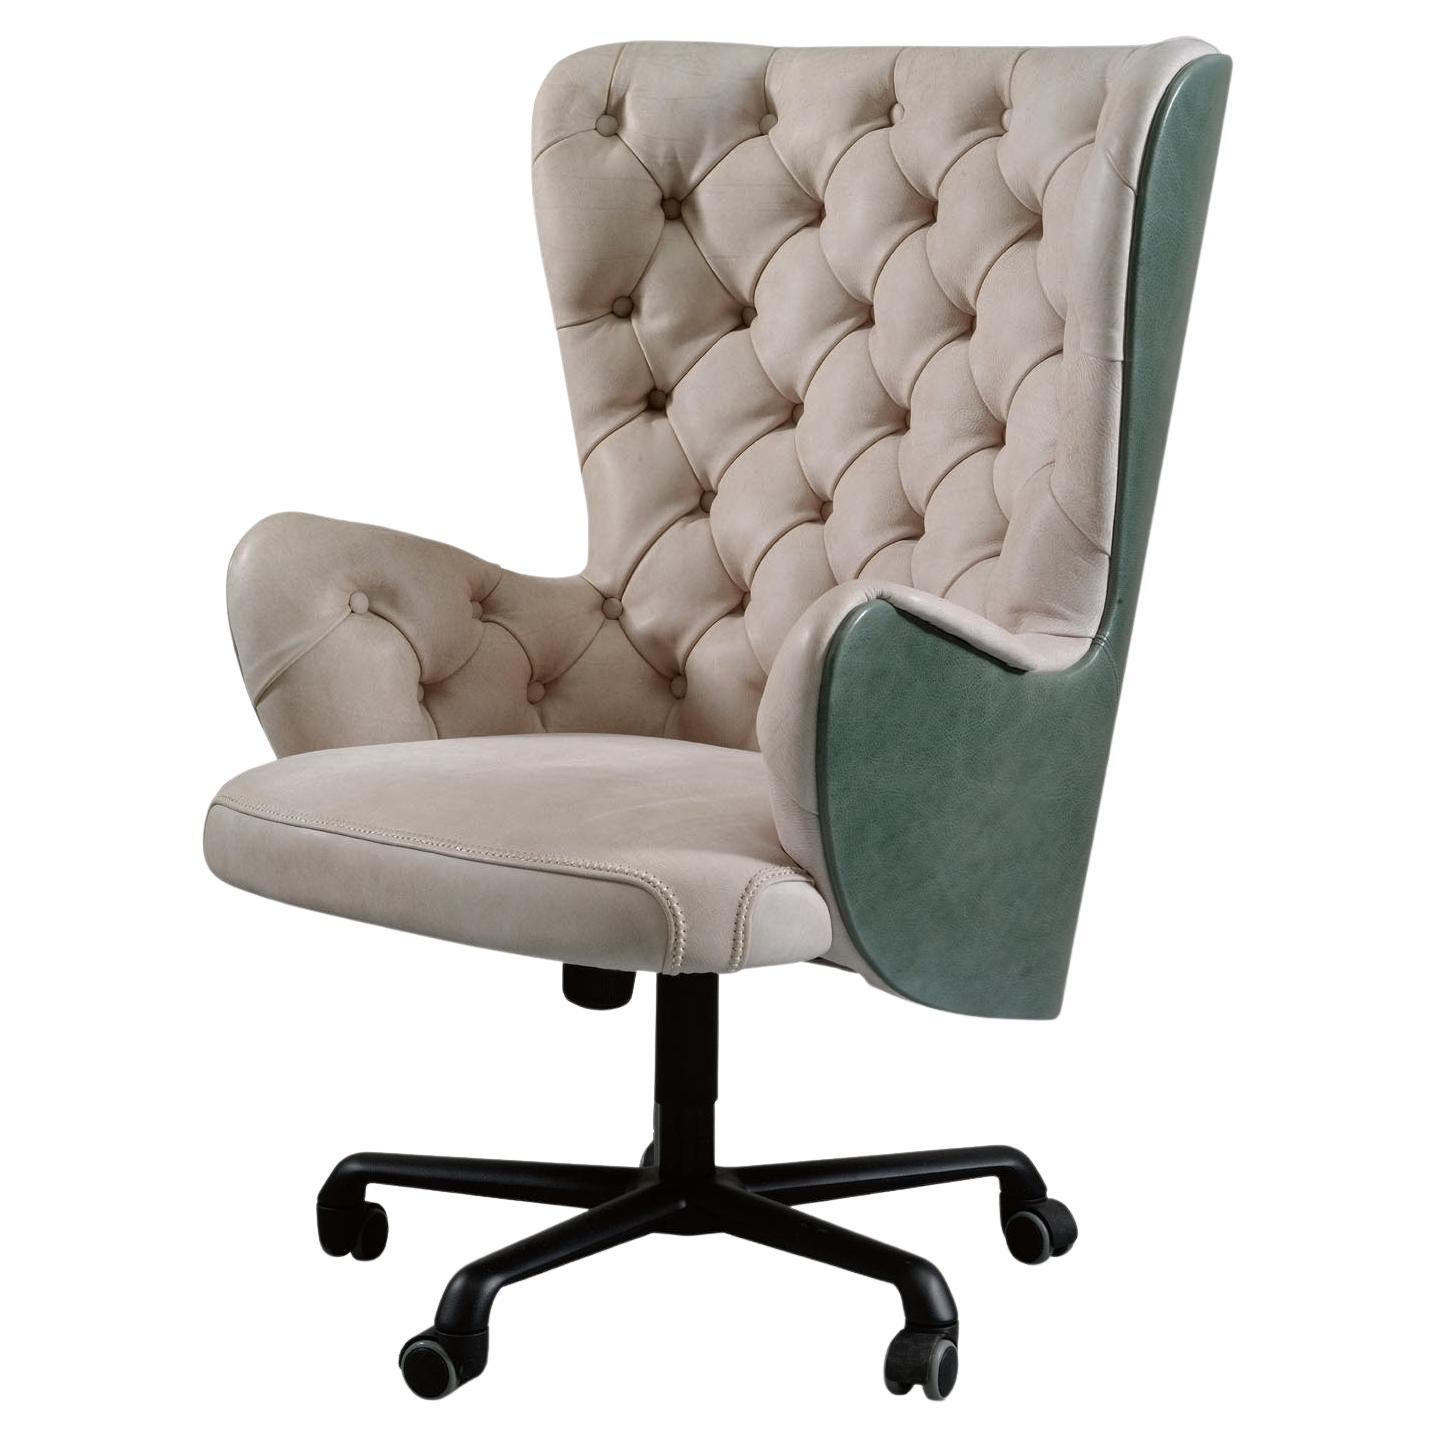 Upholstered, Leather, Sophia Office Chair Swivel For Sale